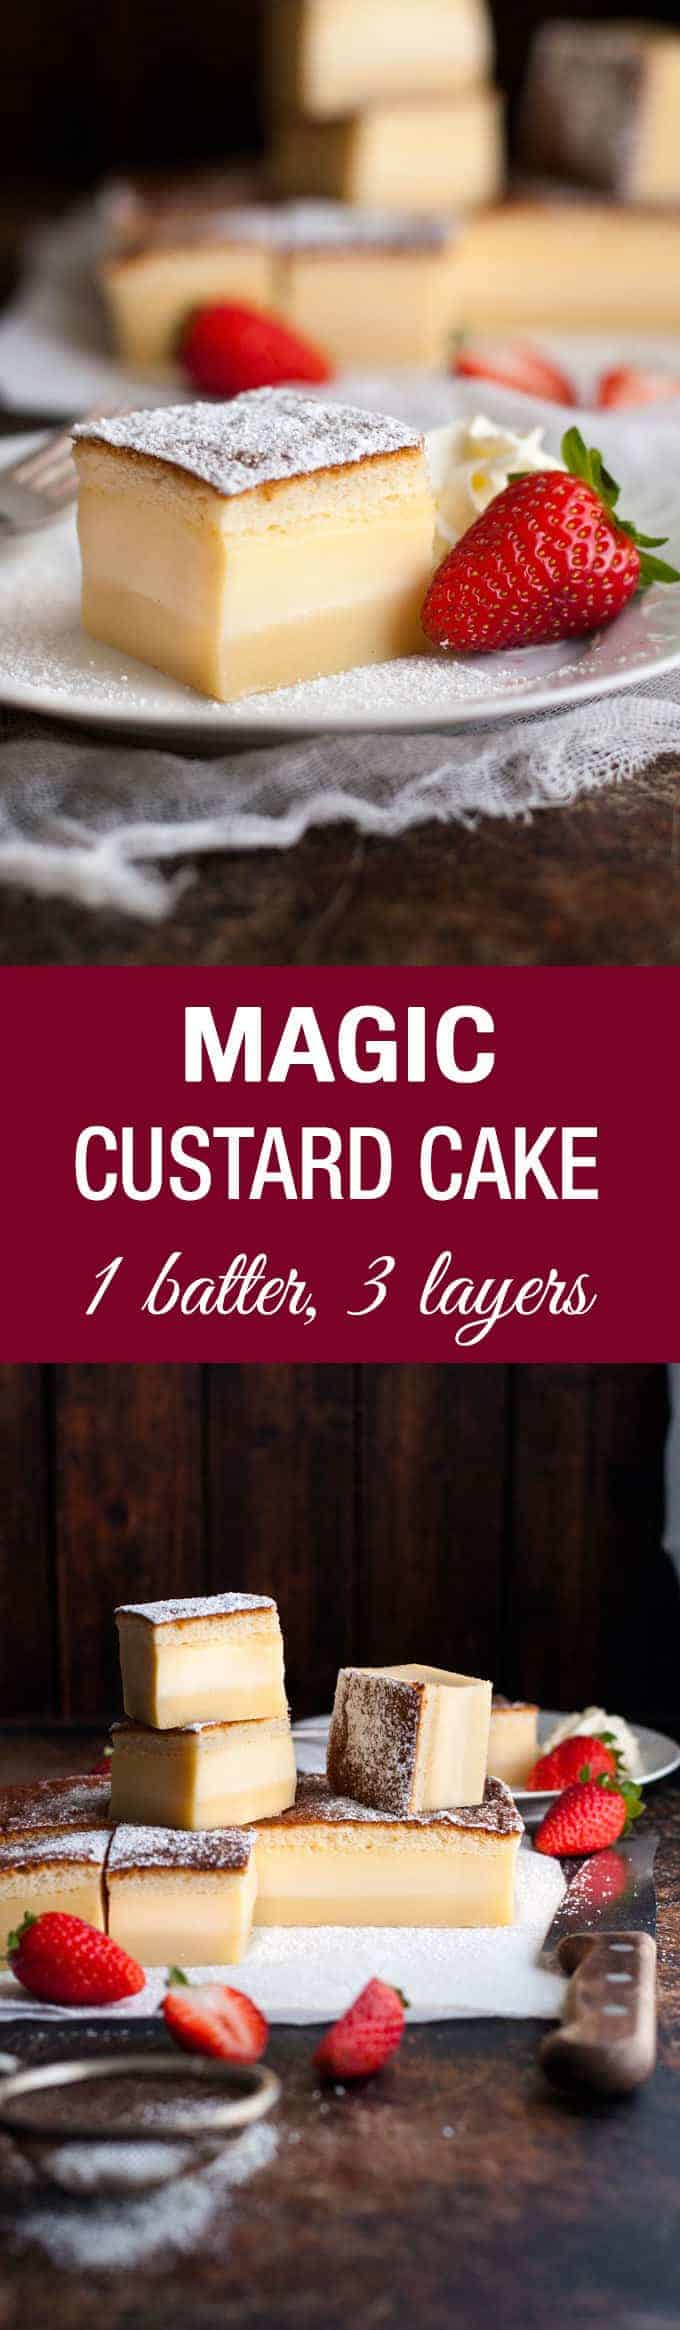 Magic Custard Cake - one simple batter transforms into a 3 layered cake! A fudgey base, soft custard middle and fluffy sponge topping.